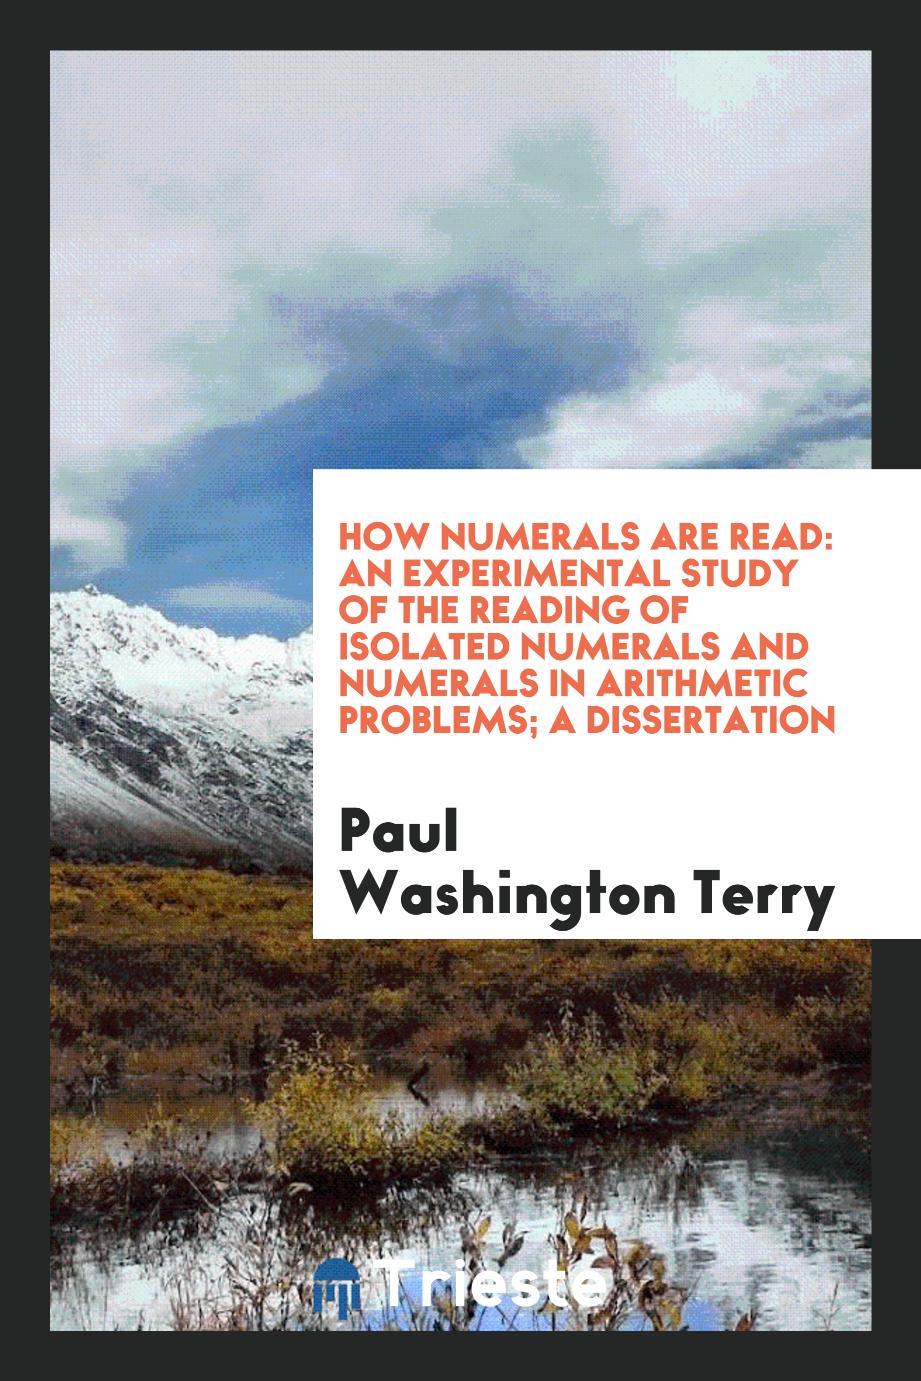 How Numerals Are Read: An Experimental Study of the Reading of Isolated Numerals and Numerals in Arithmetic Problems; A Dissertation